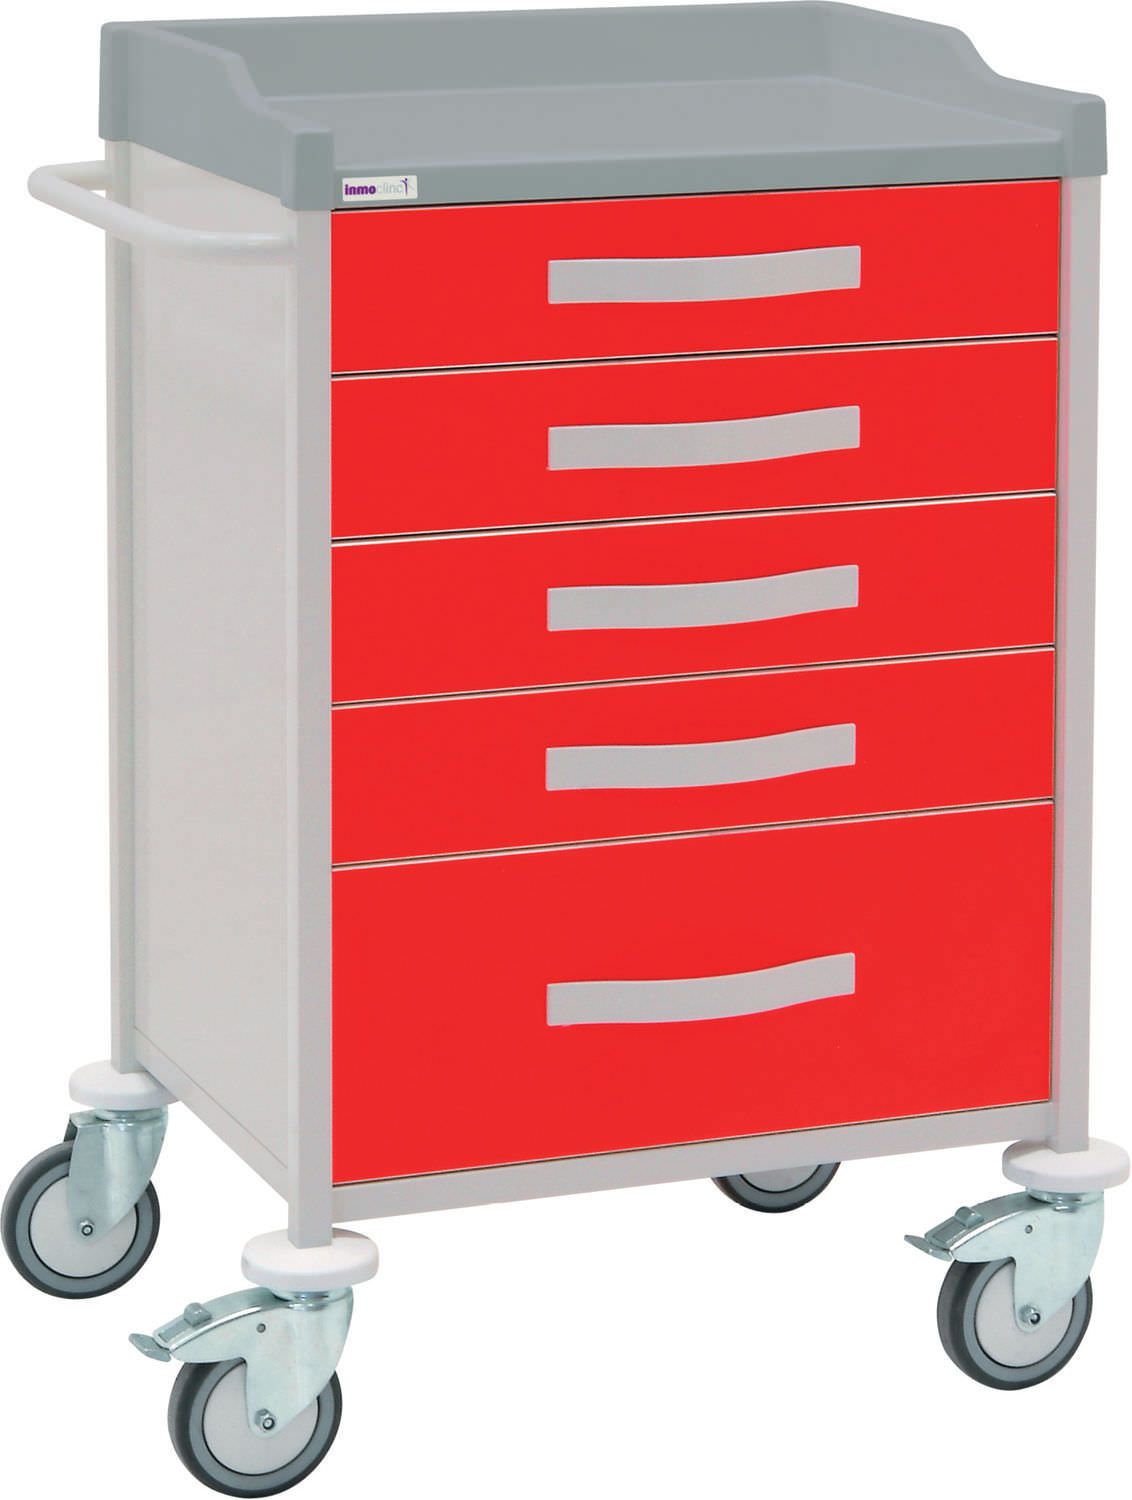 Multi-function trolley / with drawer 10850 Inmoclinc